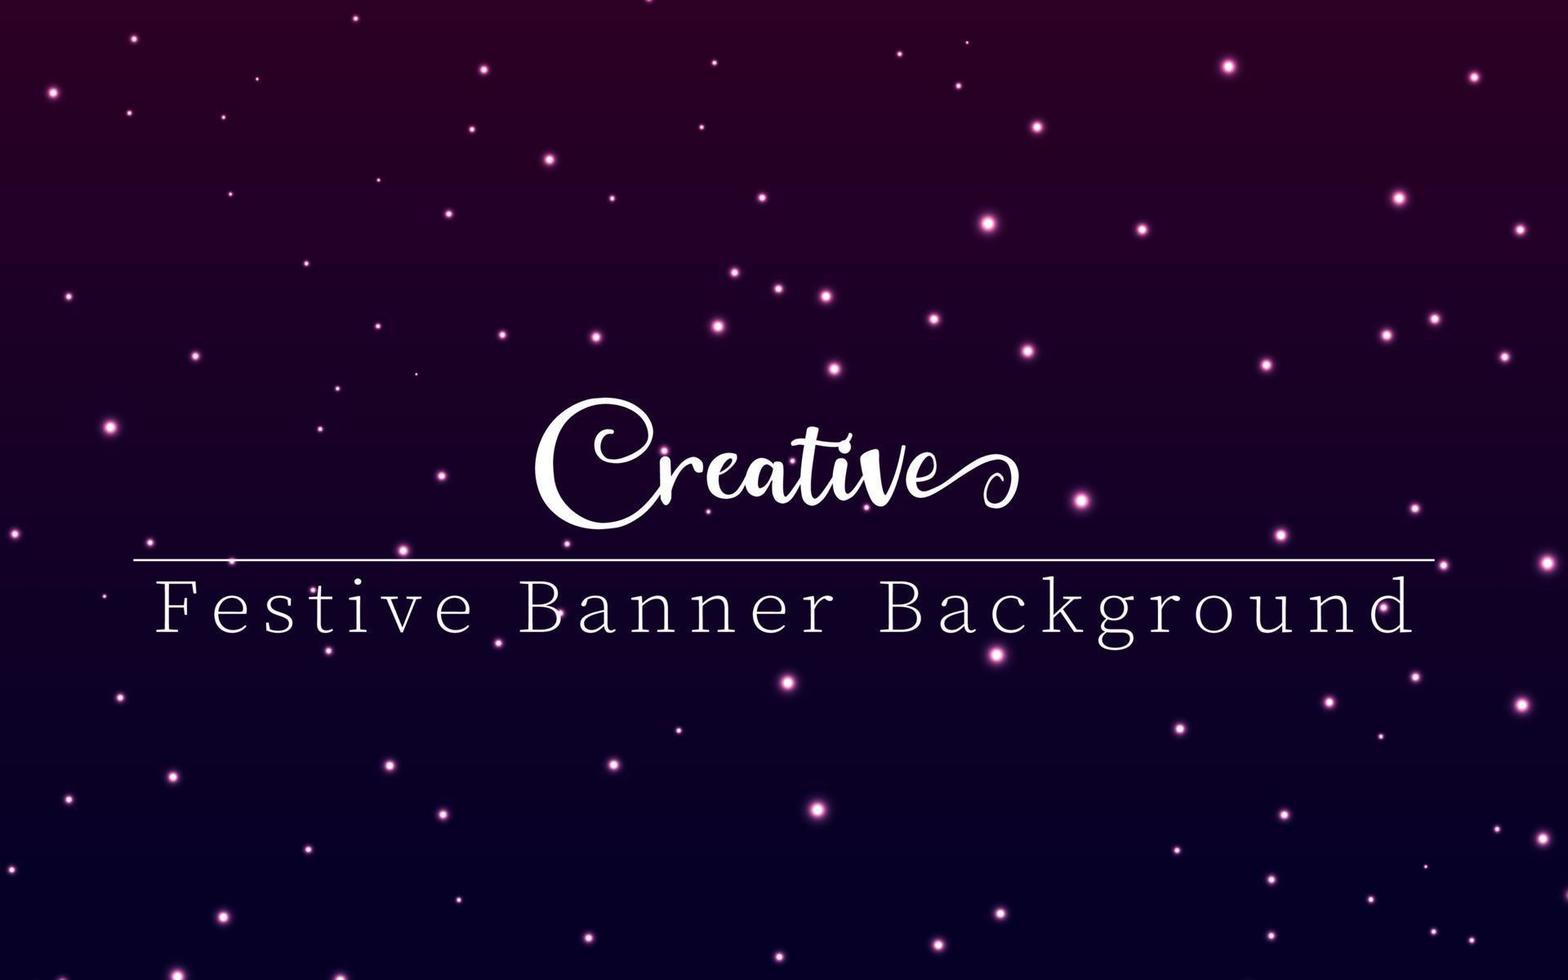 Glowing dots festive vector background. Creative festival banner for festive season promotion and advertisement.